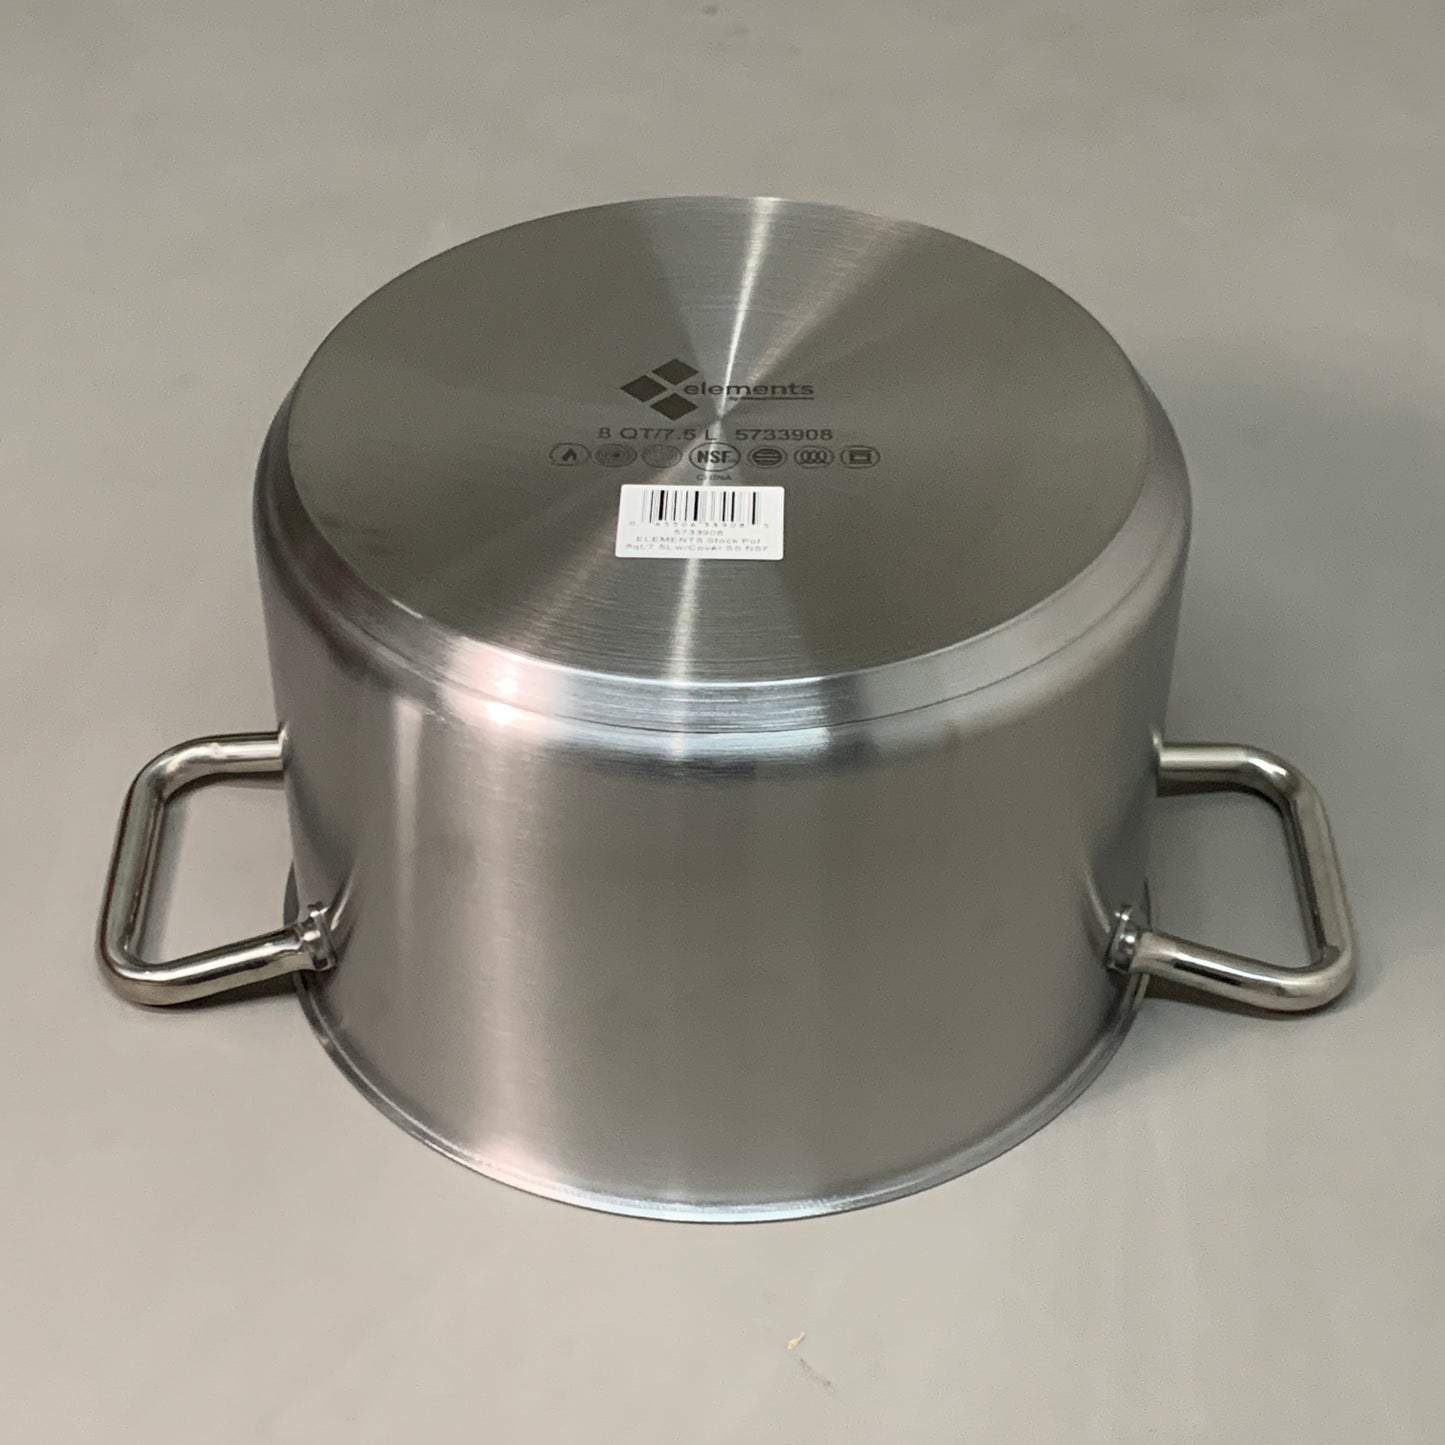 BROWNE ELEMENTS Stock Pot 8qt/Cover SS NSF 5733908 (New)